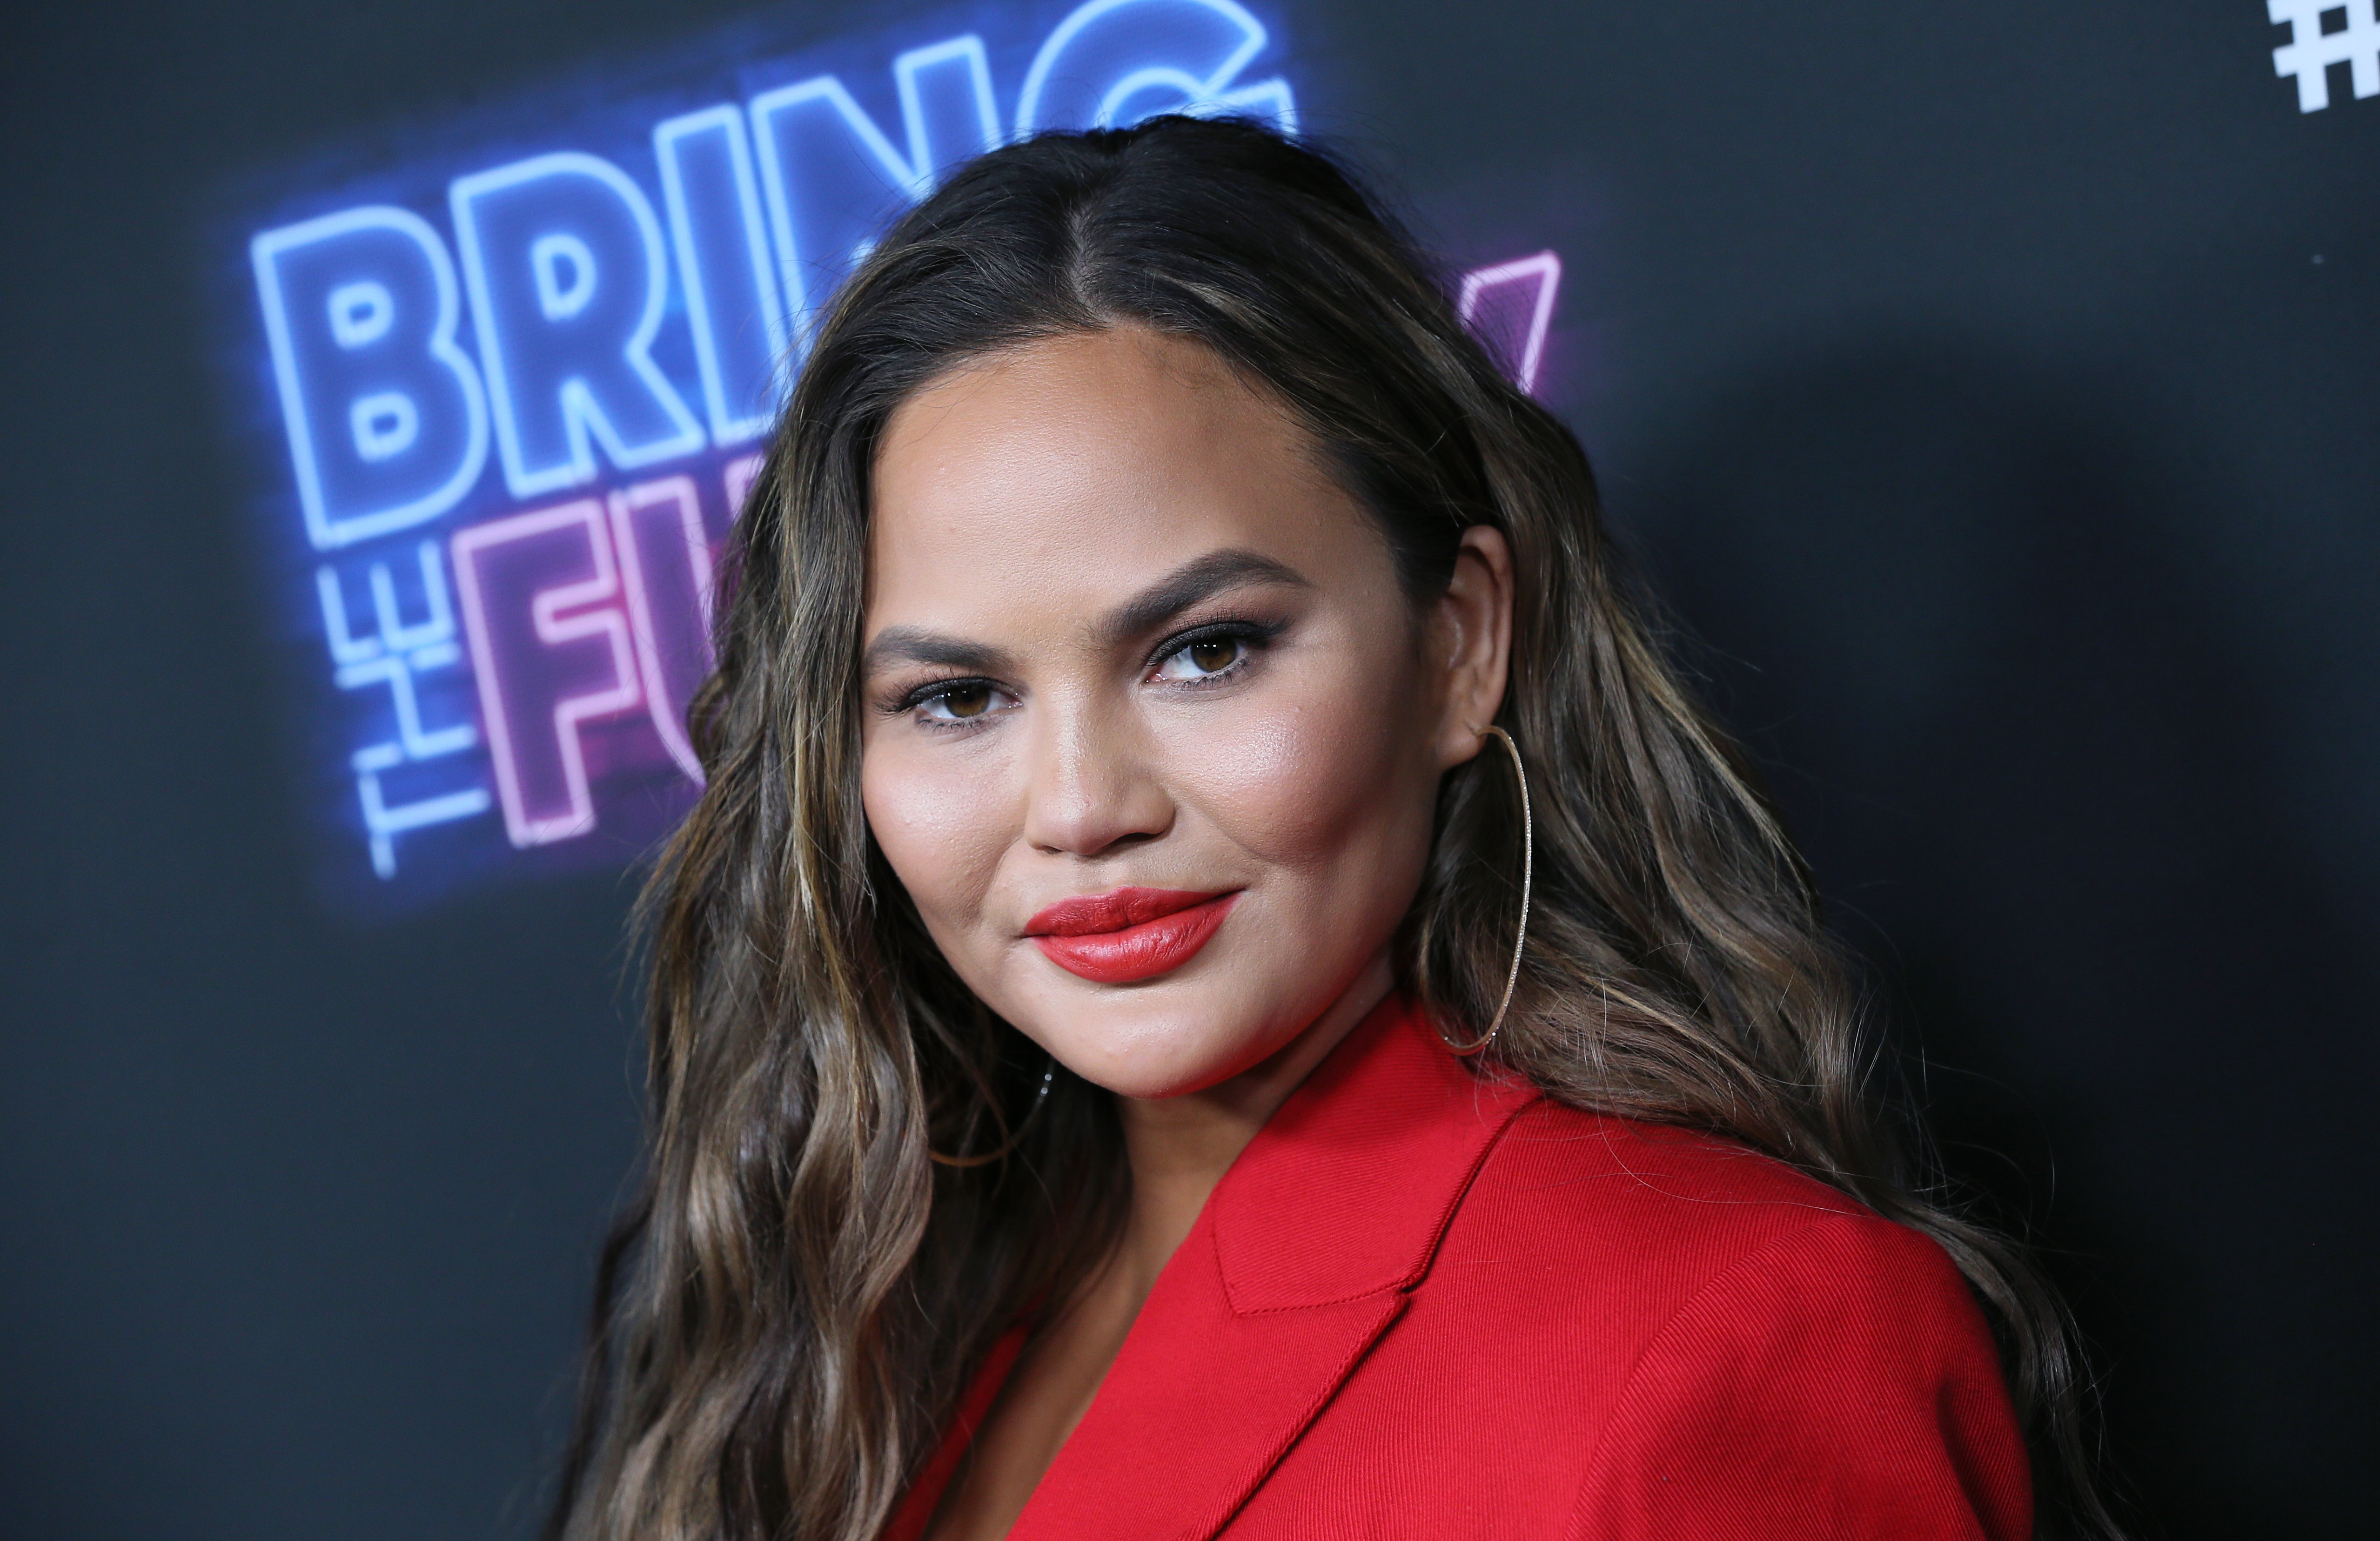 Chrissy Teigen attends the premiere of NBC's "Bring The Funny" at Rockwell Table & Stage on June 26, 2019. | Photo: Getty Images